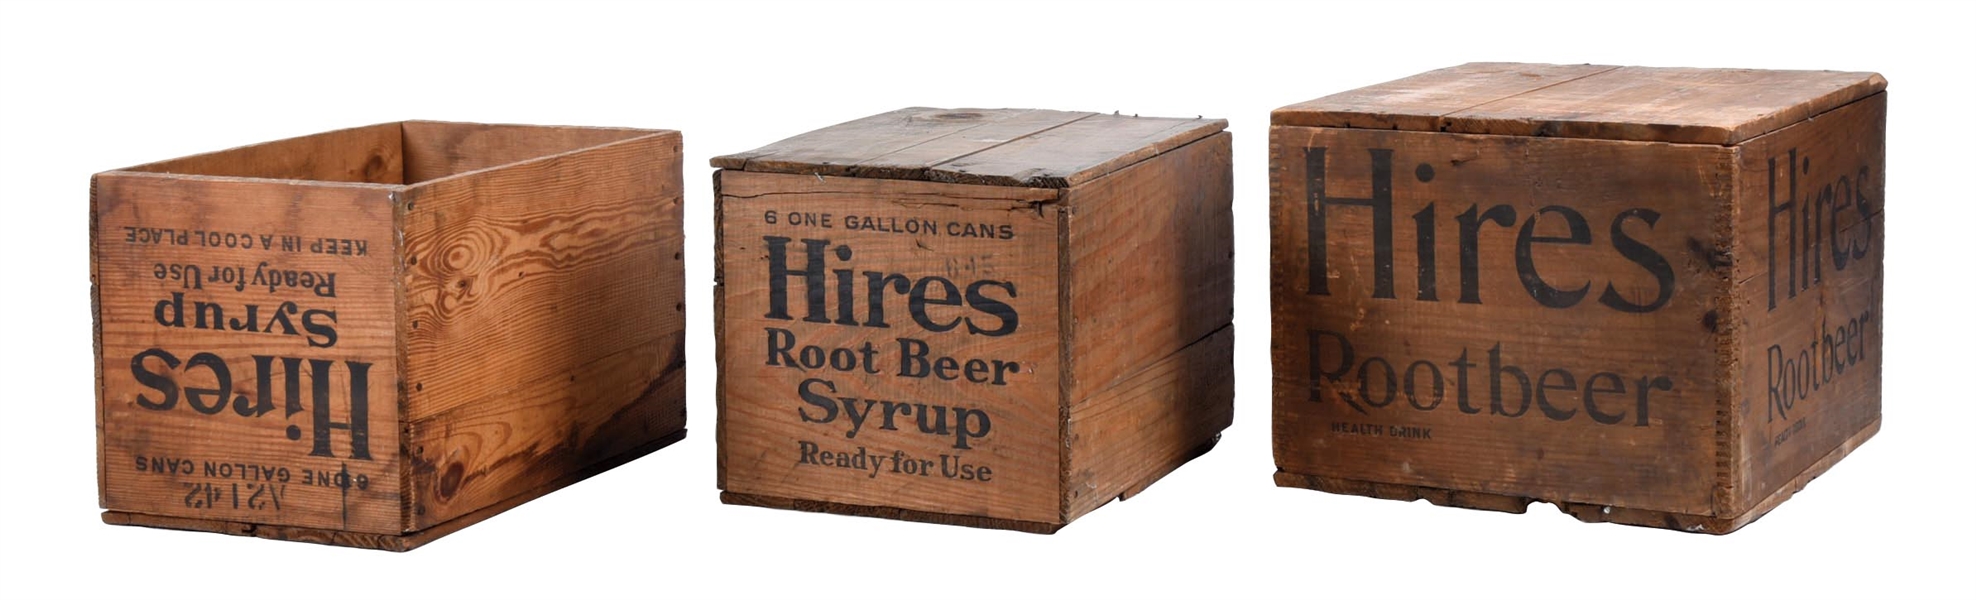 COLLECTION OF 3 HIRES ROOT BEER SYRUP JUG CRATES